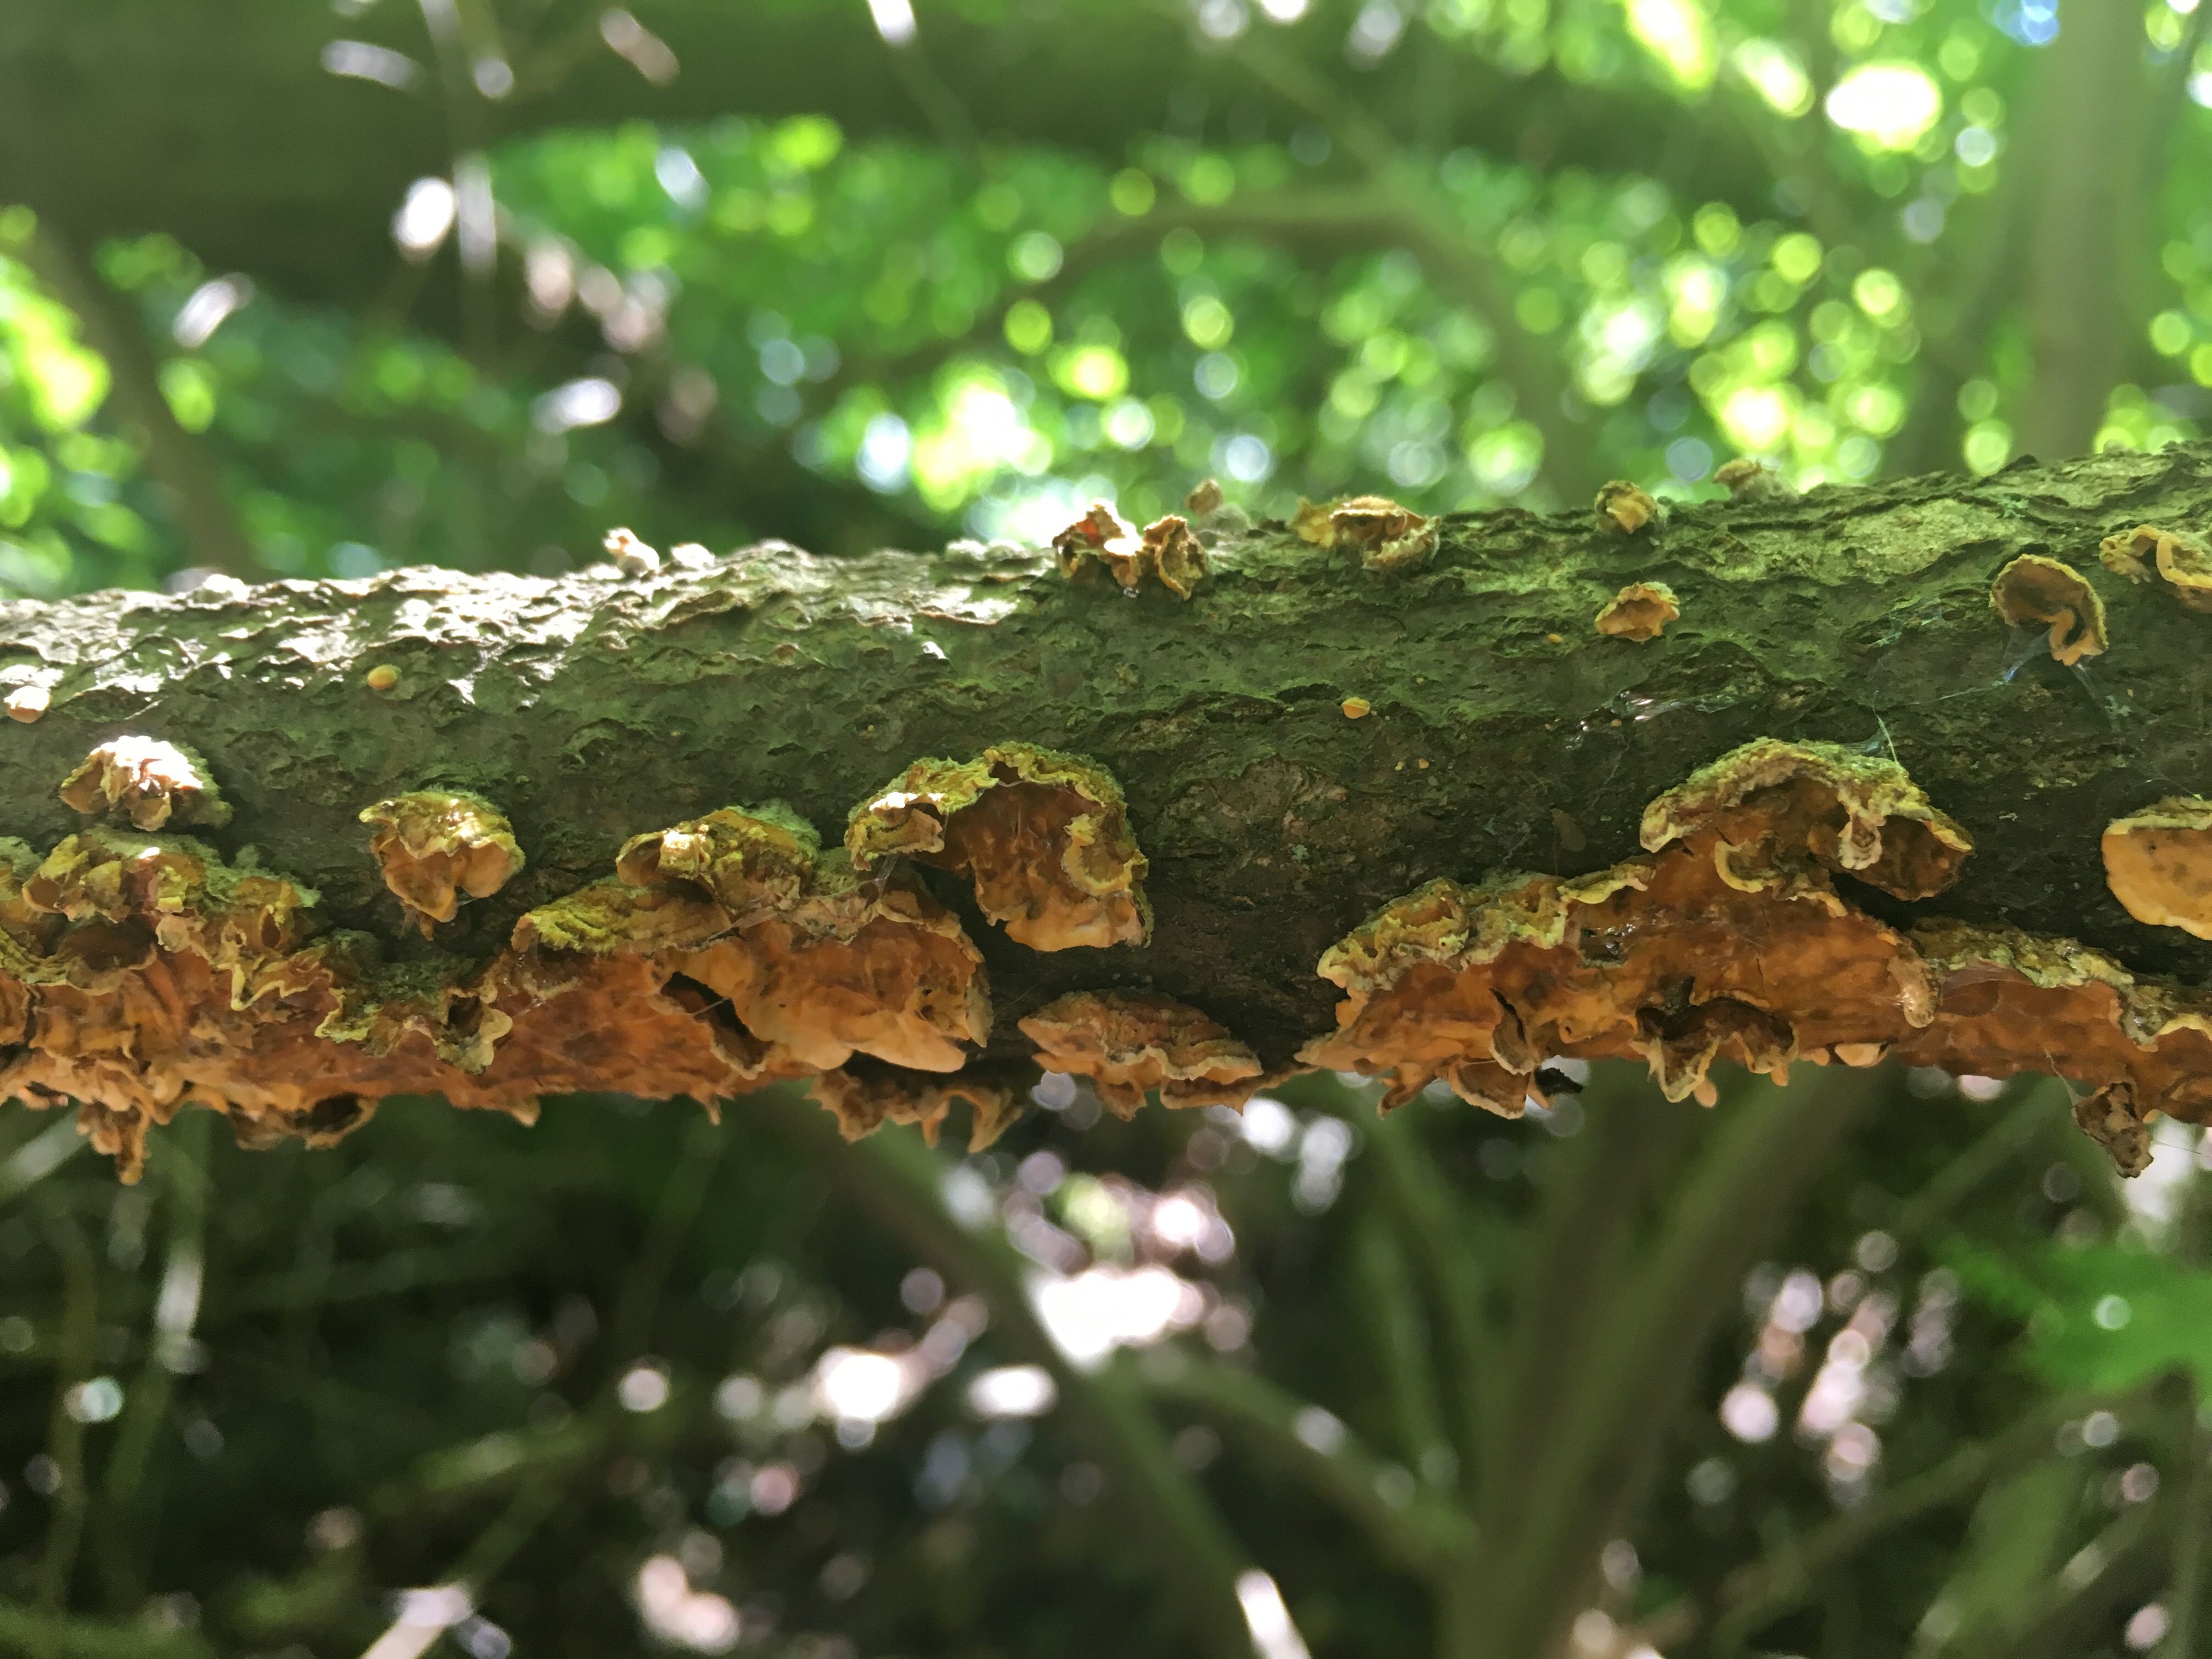 NMDS to Study Dead Wood Fungi Communities in Parks of New Jersey